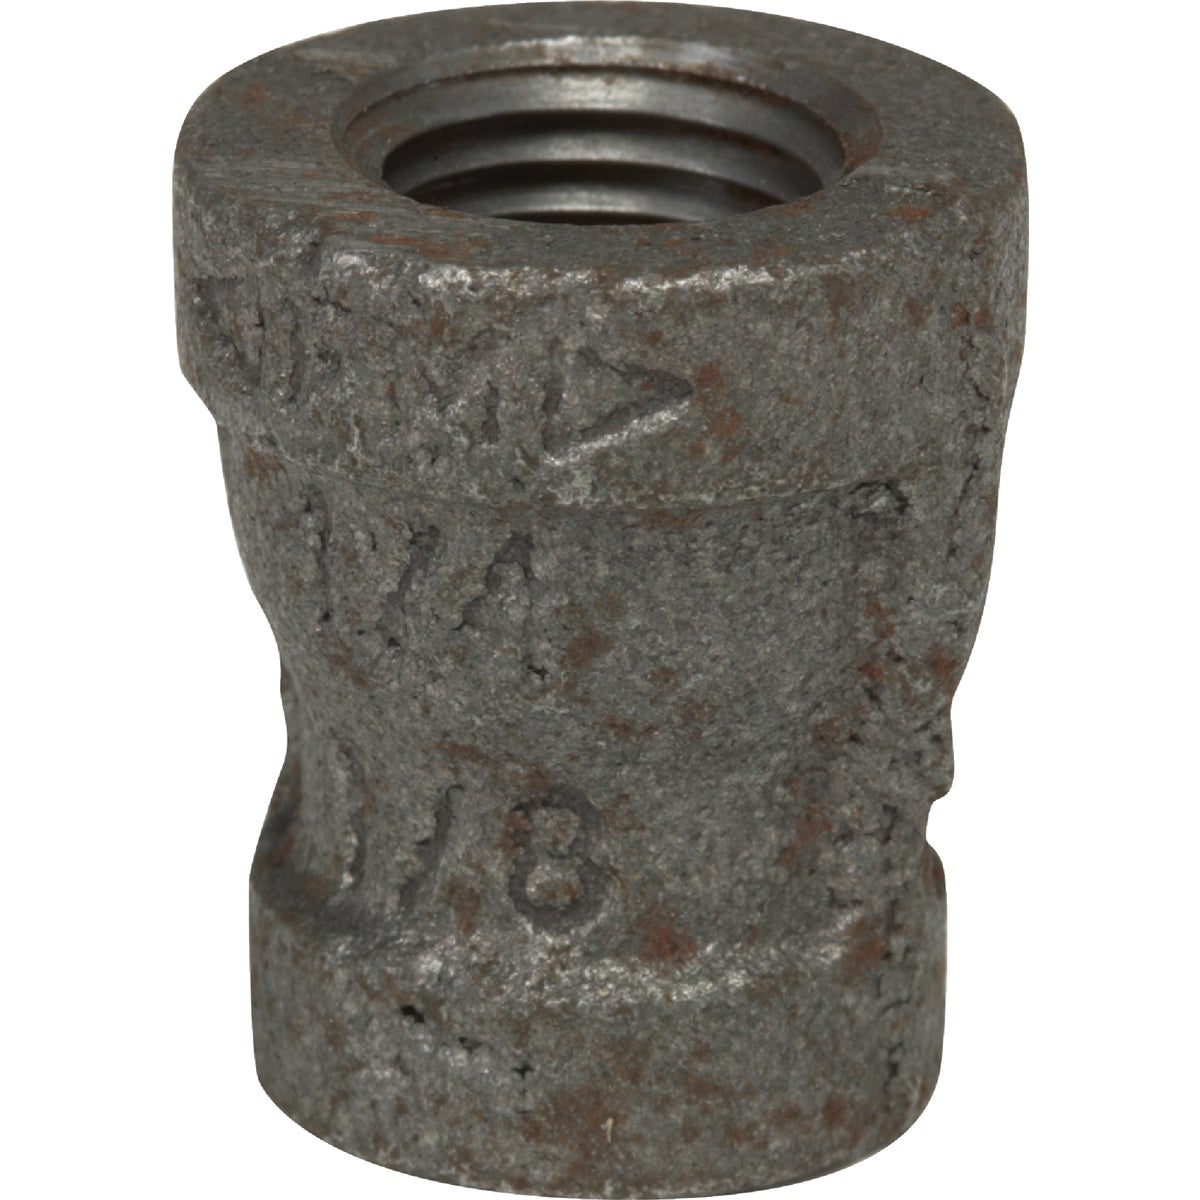 Item 433285, Made of Malleable iron which is designed for high tensile strength.